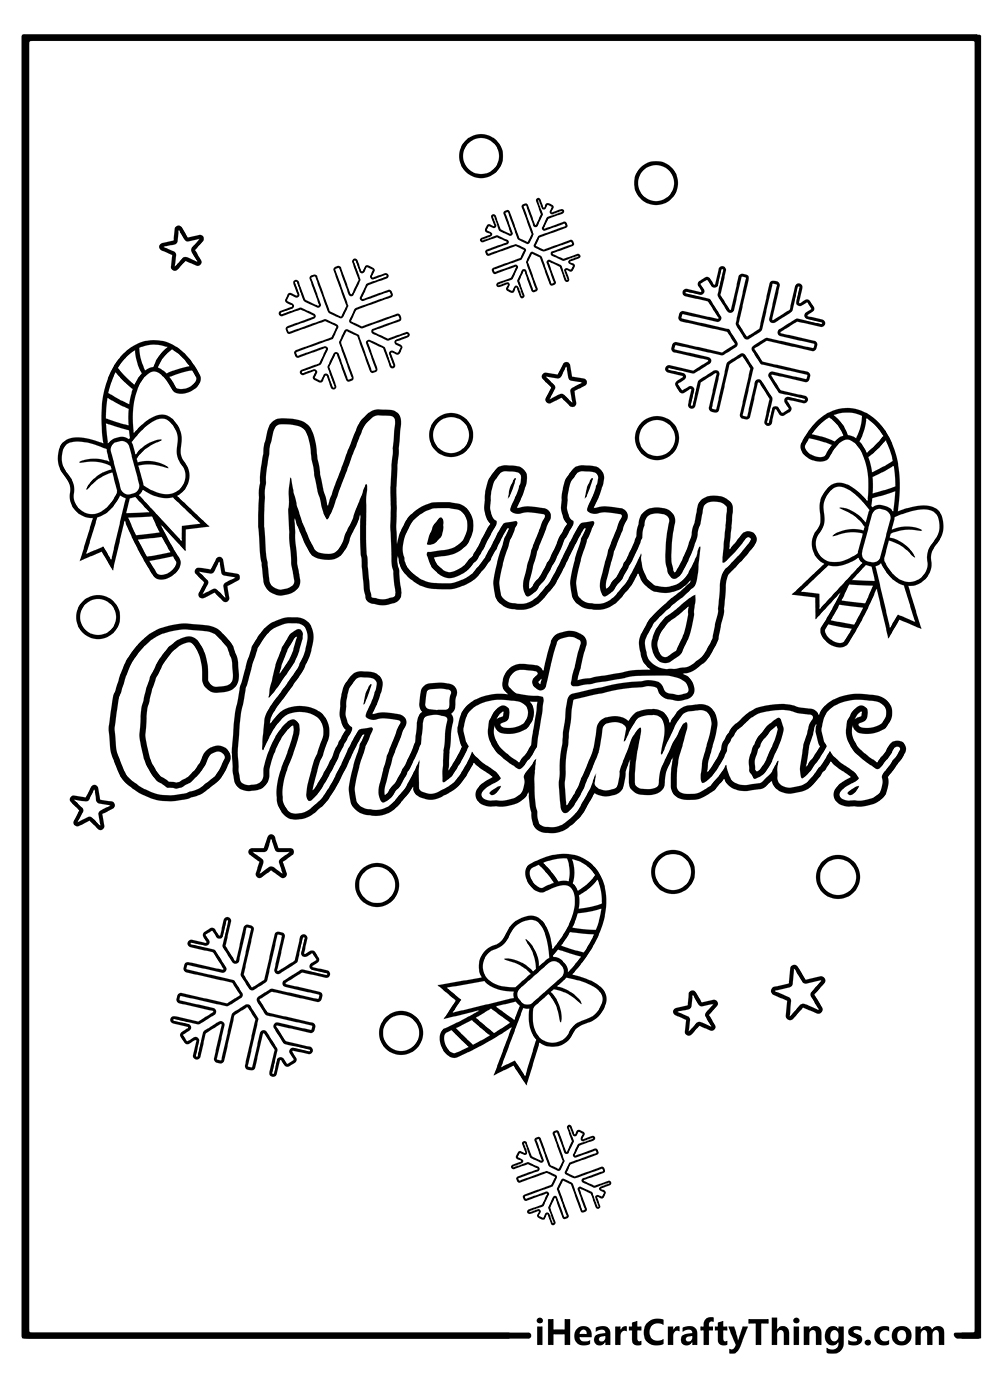 Merry Christmas Coloring Pages free printable